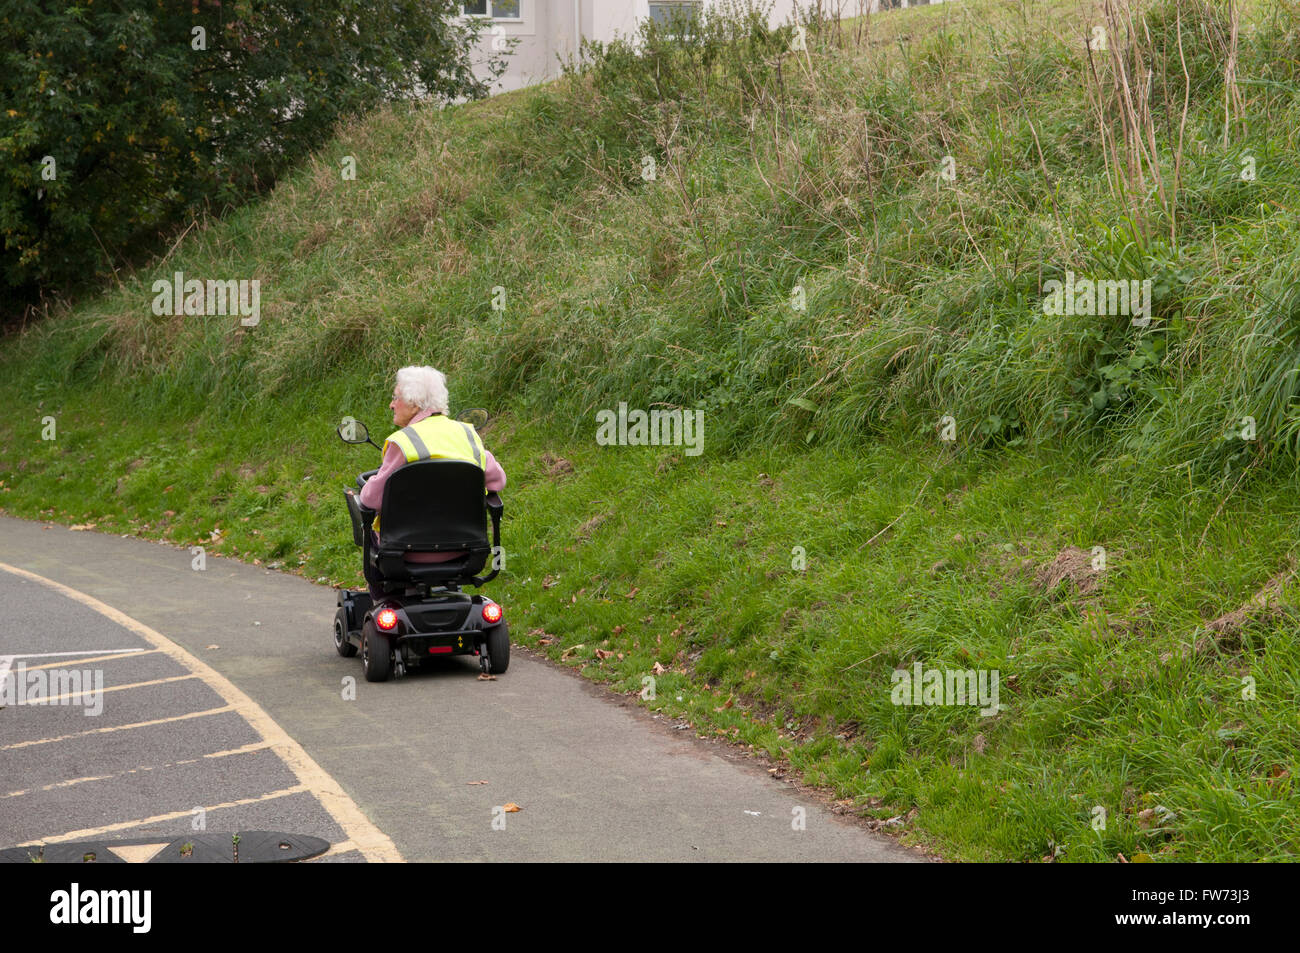 Rear view of an elderly woman using a mobility scooter wearing a yellow hi-vis safety vest Stock Photo